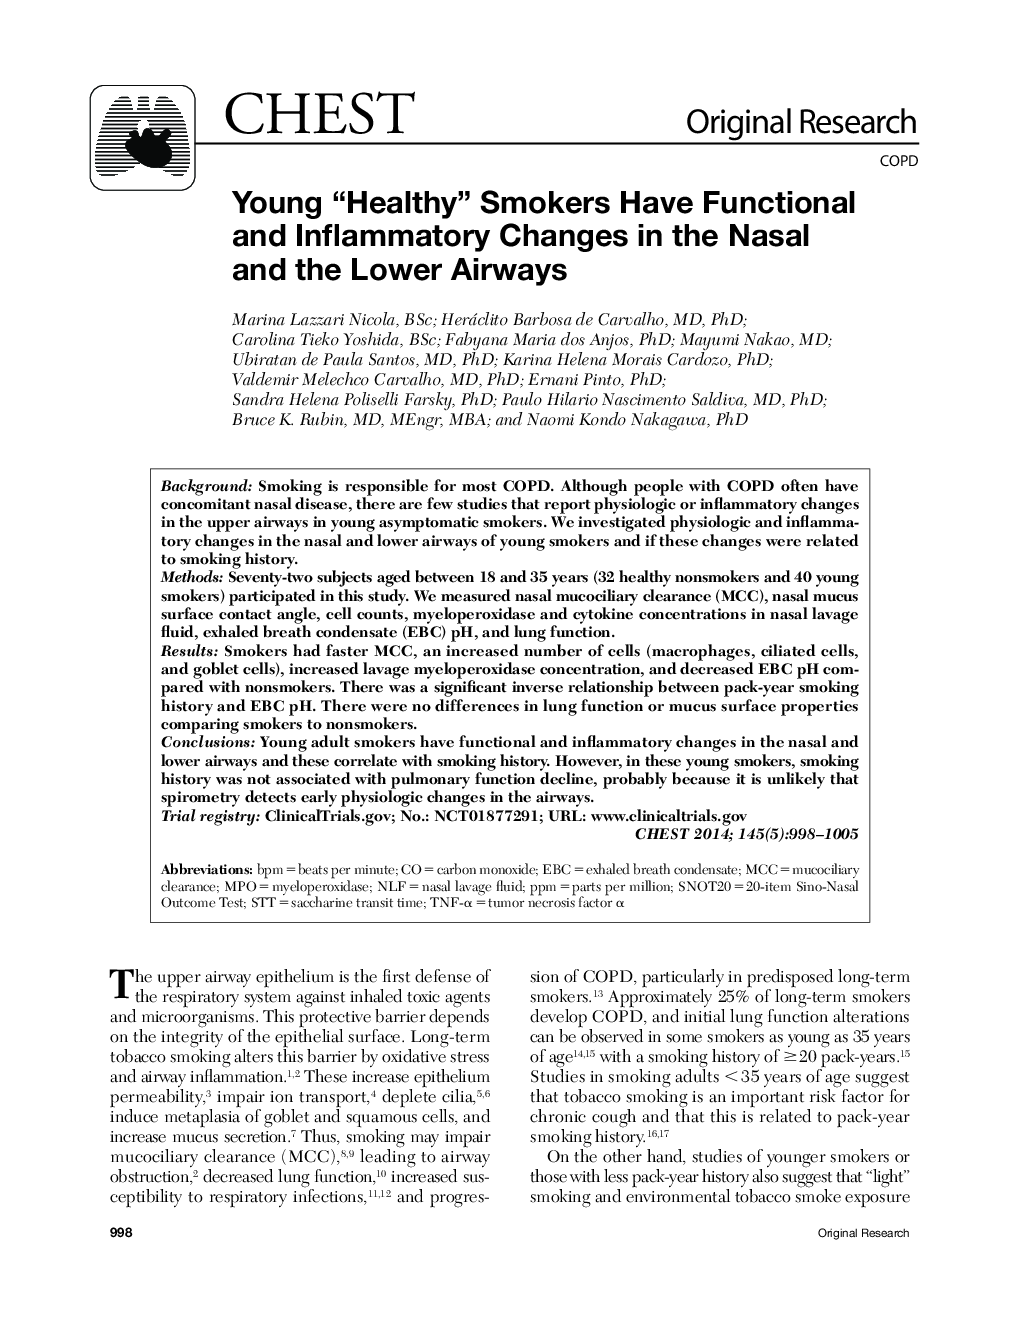 Young “Healthy” Smokers Have Functional and Inflammatory Changes in the Nasal and the Lower Airways 